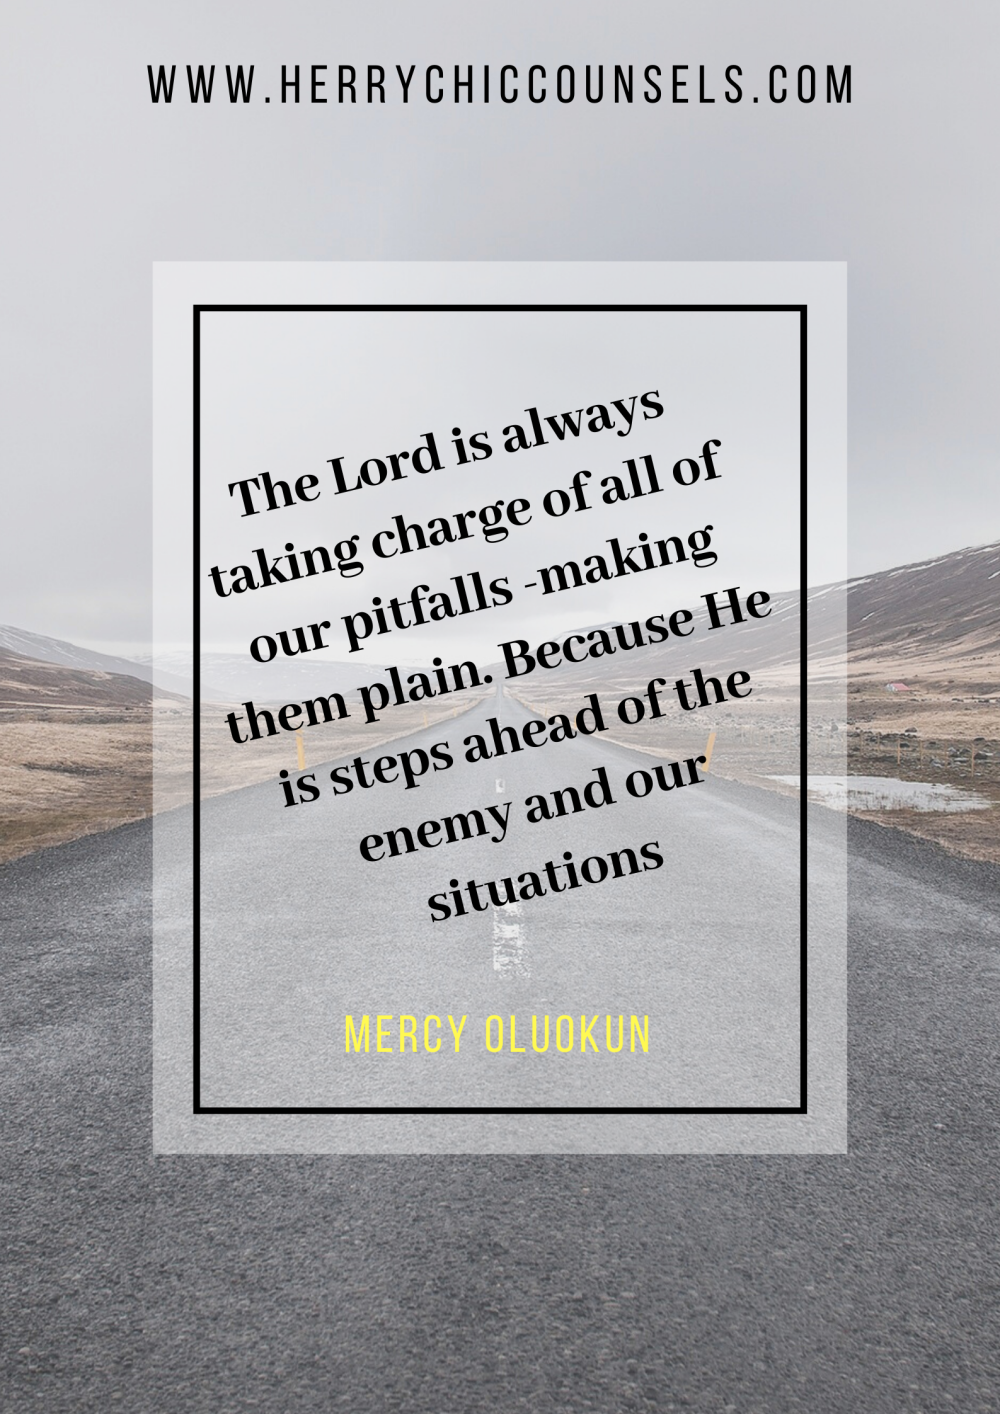 The Lord takes charge of us - Steps ahead of our enemies